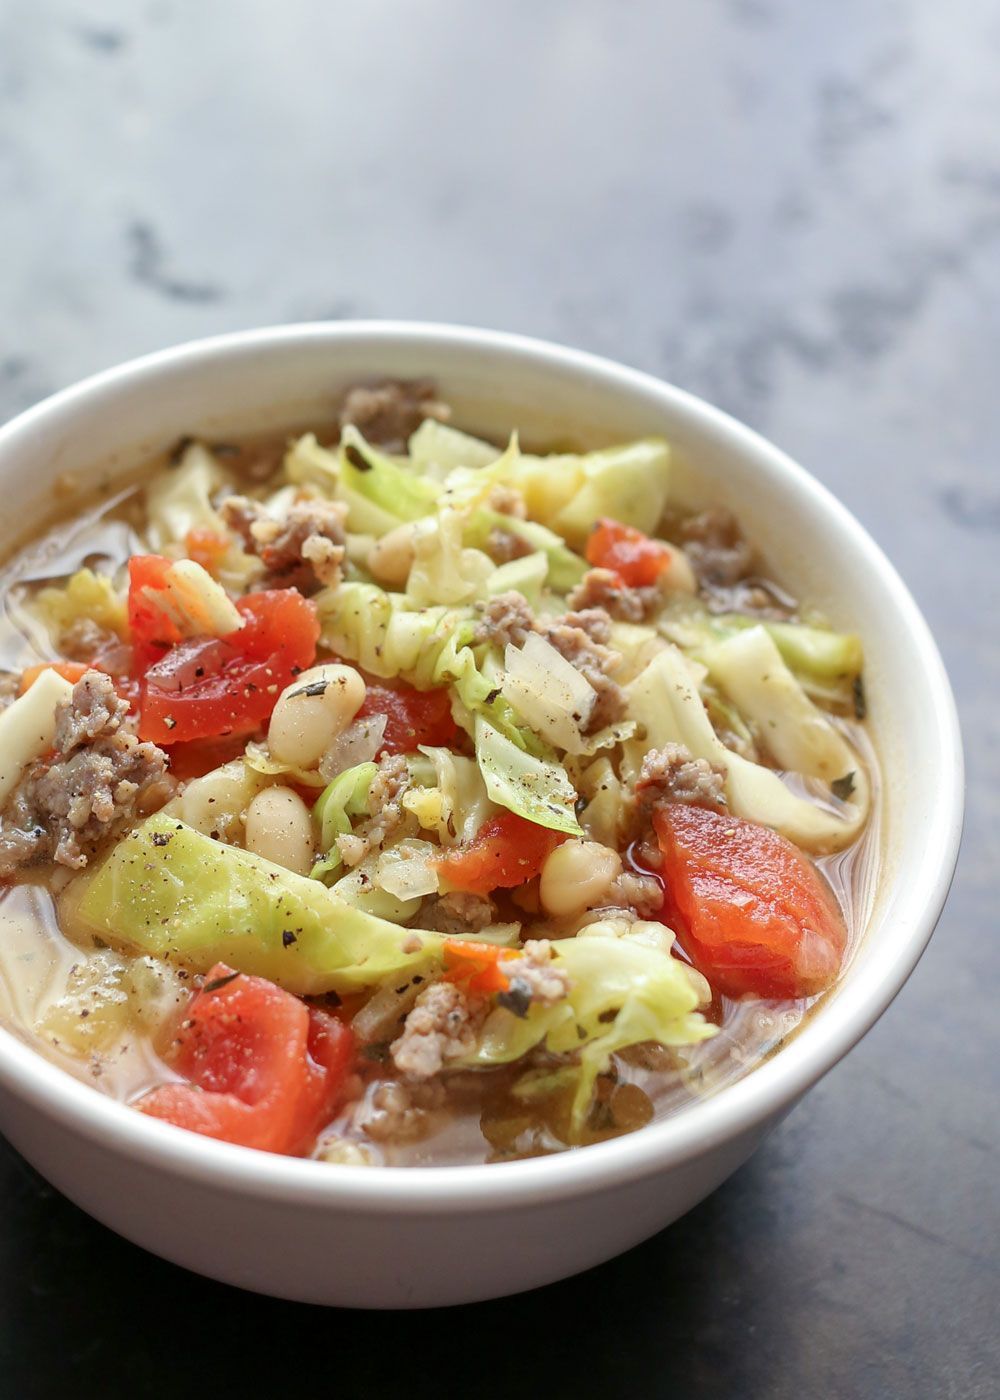 Italian White Bean, Cabbage, and Sausage Soup (ready to eat in less than 30 minutes!) recipe by Barefe